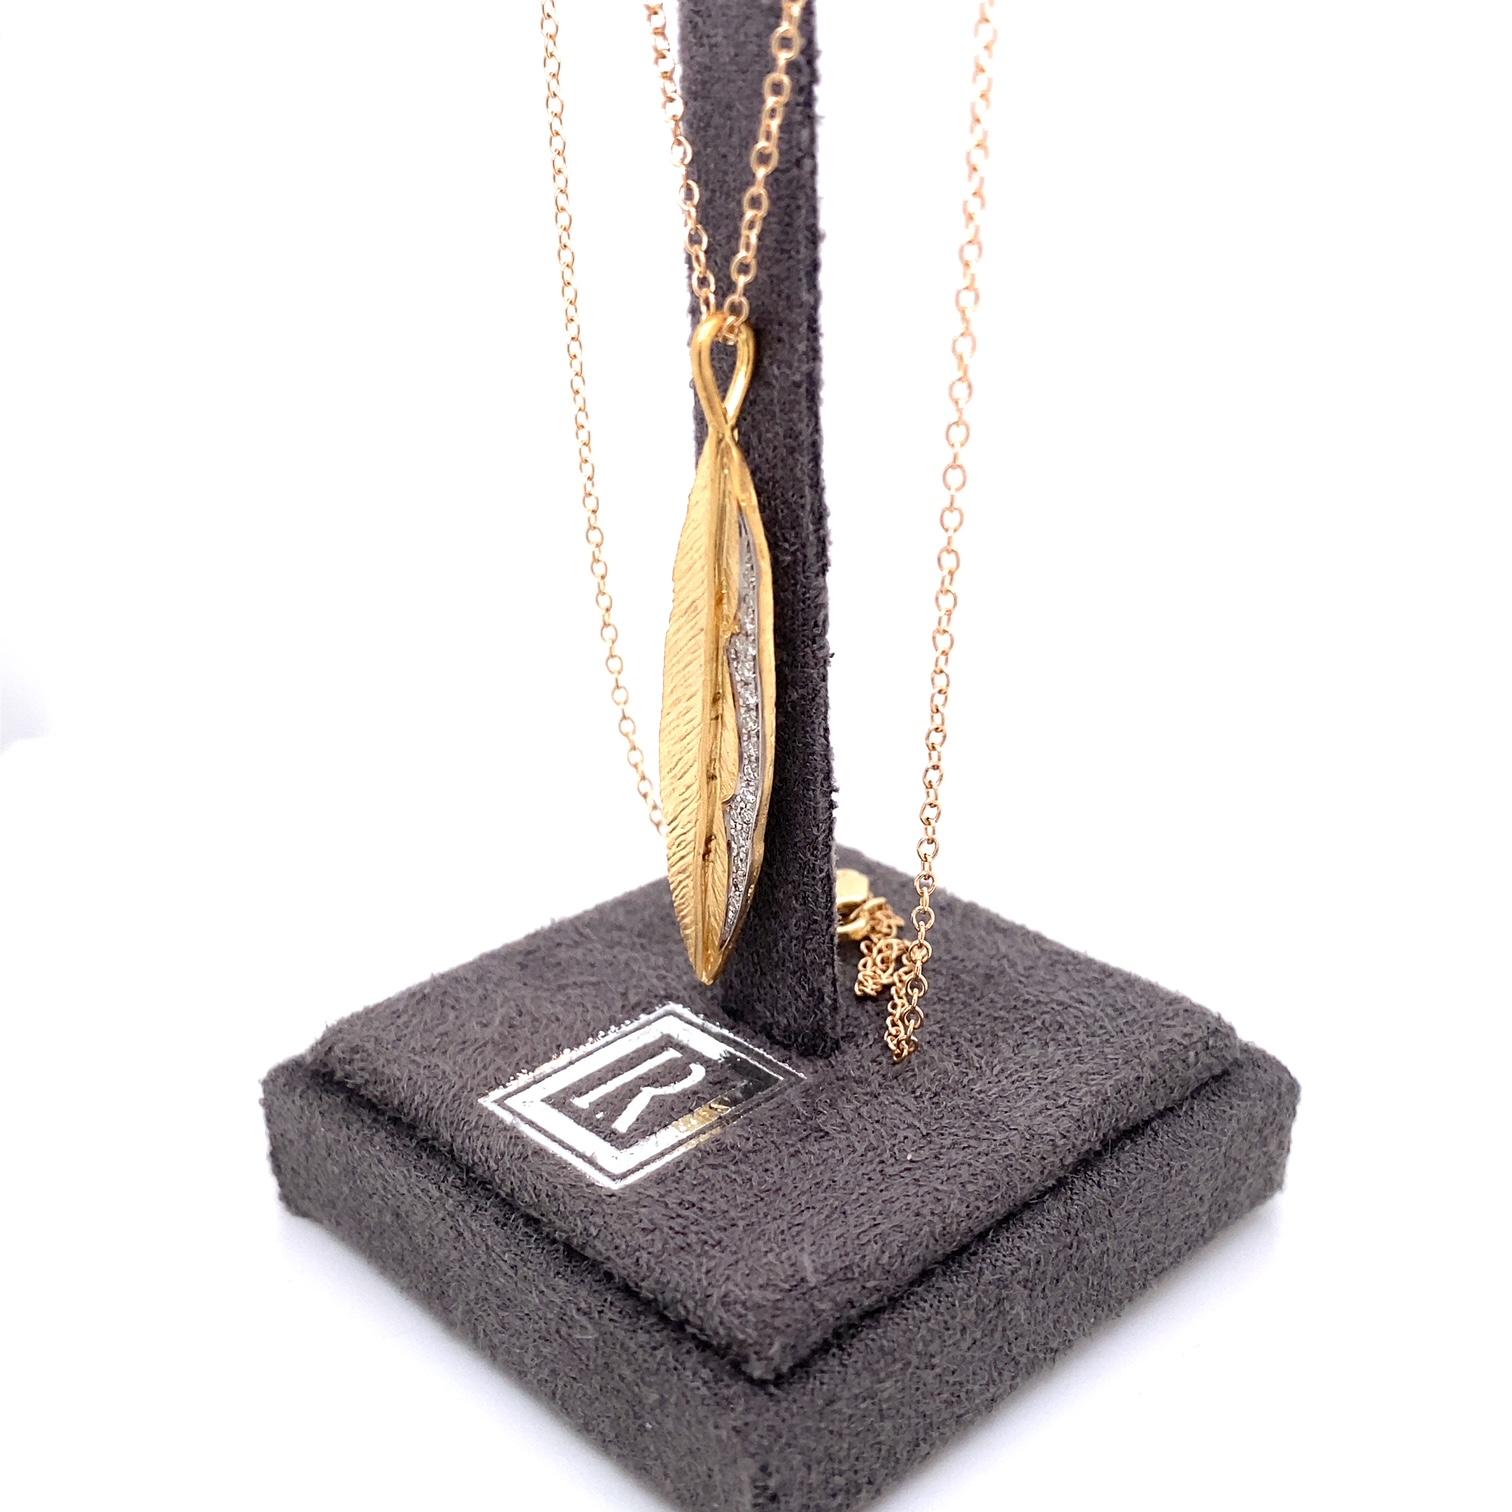 14 Karat Yellow Gold Hand-Crafted Matte and Textured-Finish Feather Pendant, Accented with 0.10 Carats of Pave Set Diamonds, Sliding on a 16